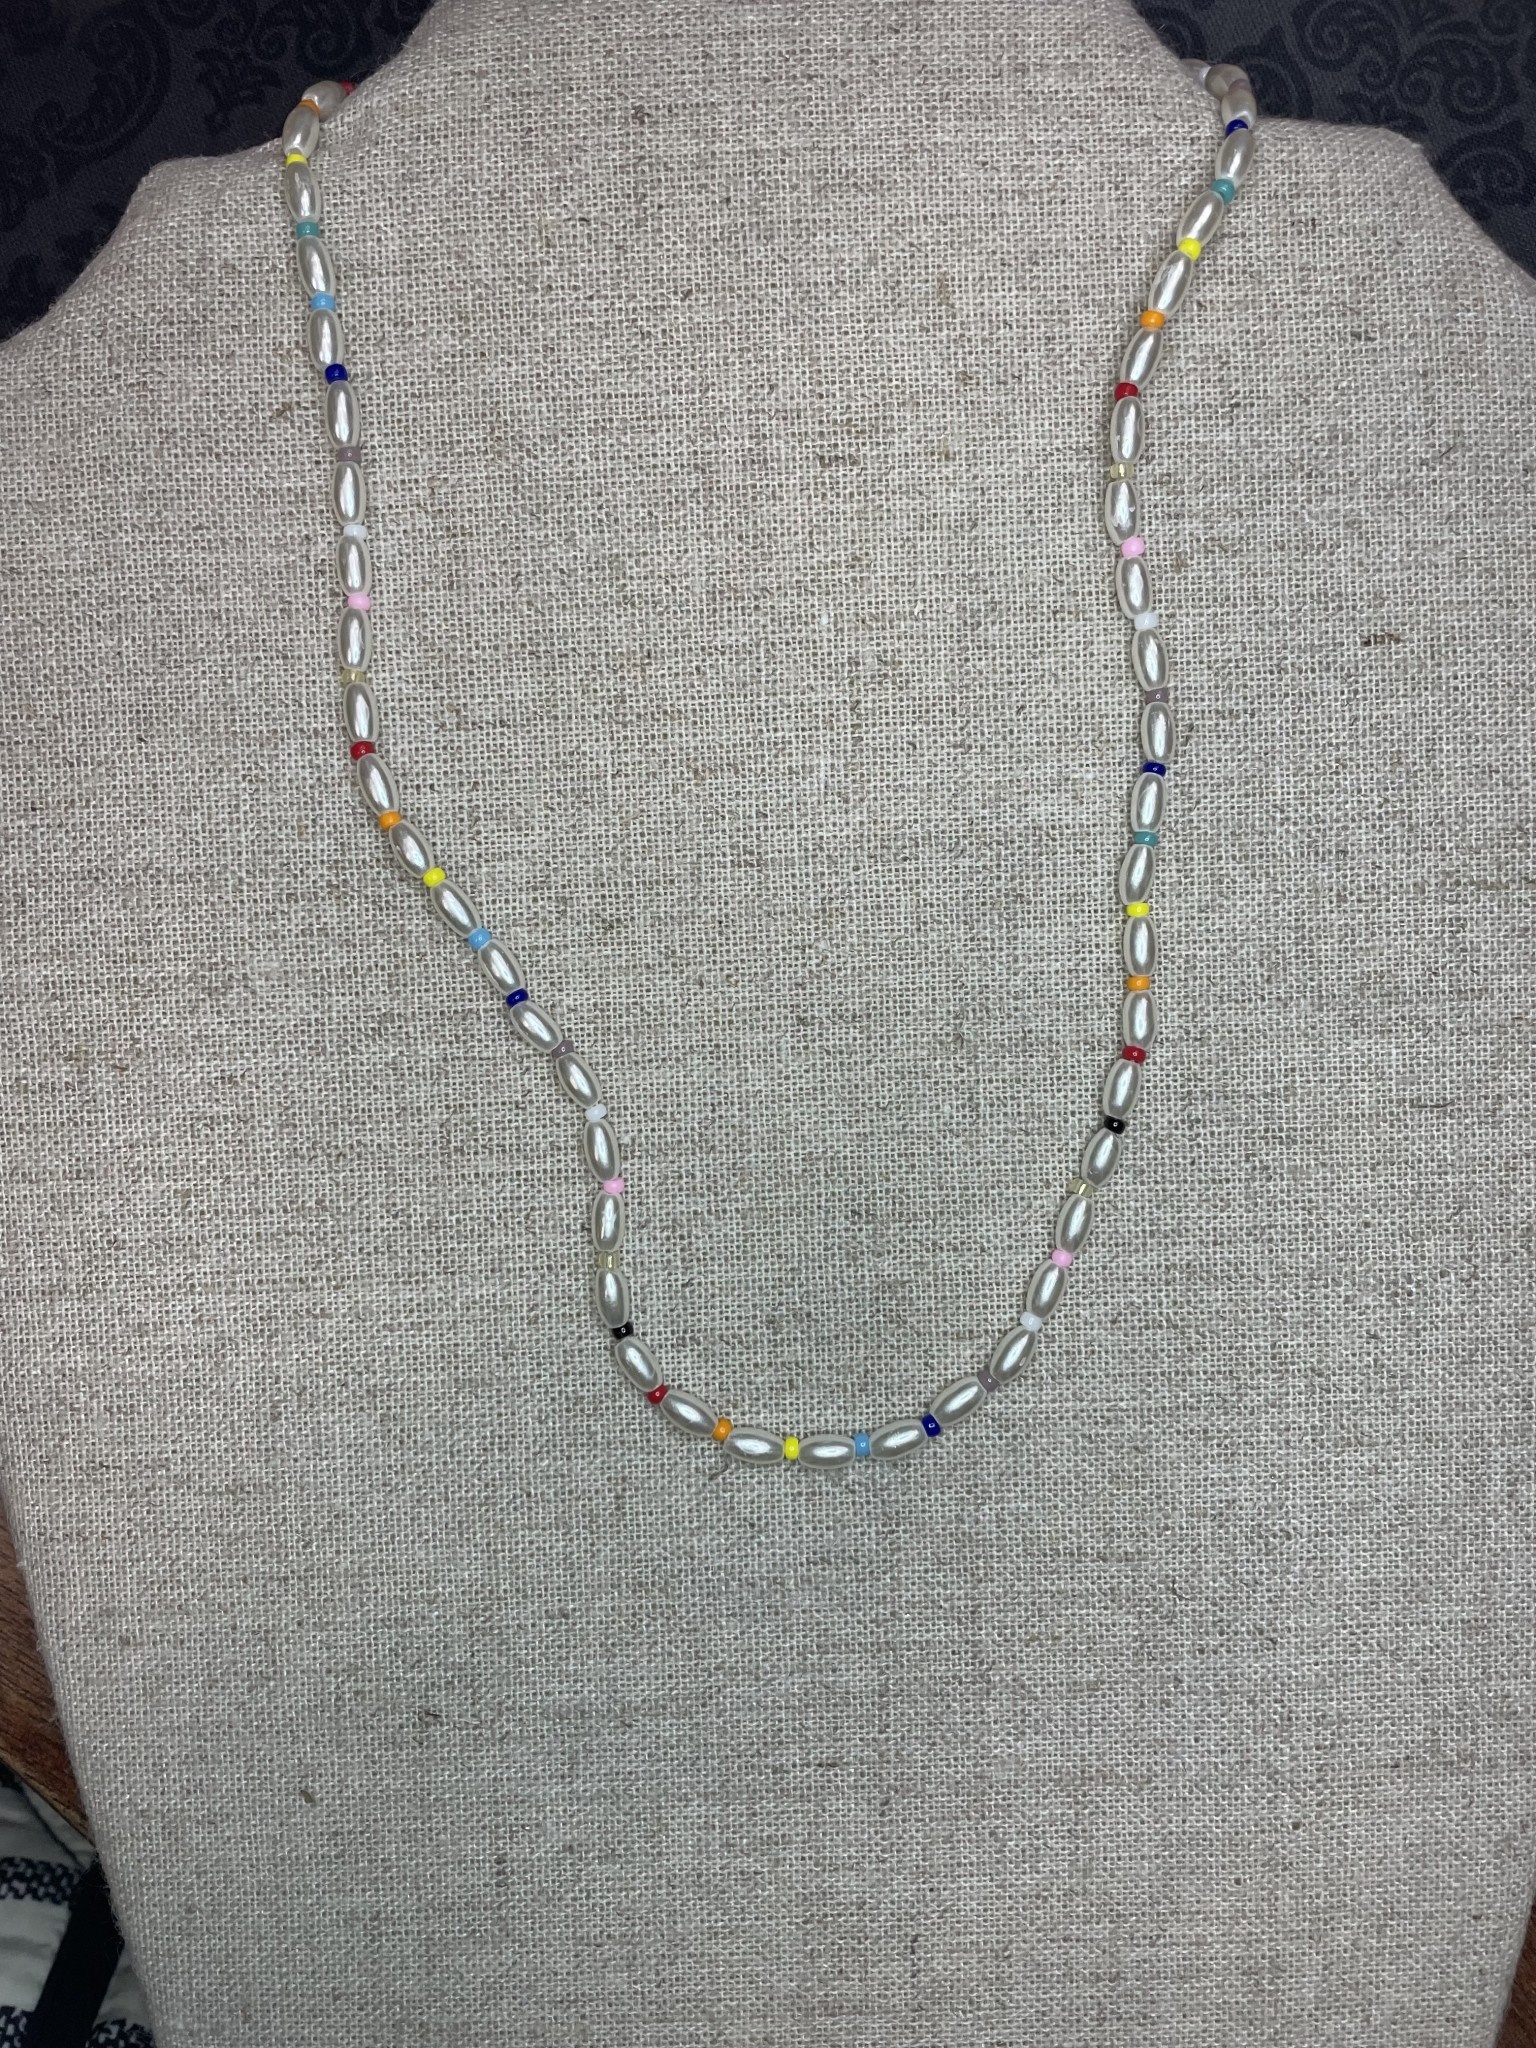 available at m. lynne designs Slender Pearl with Colorful Slice, Small Necklace